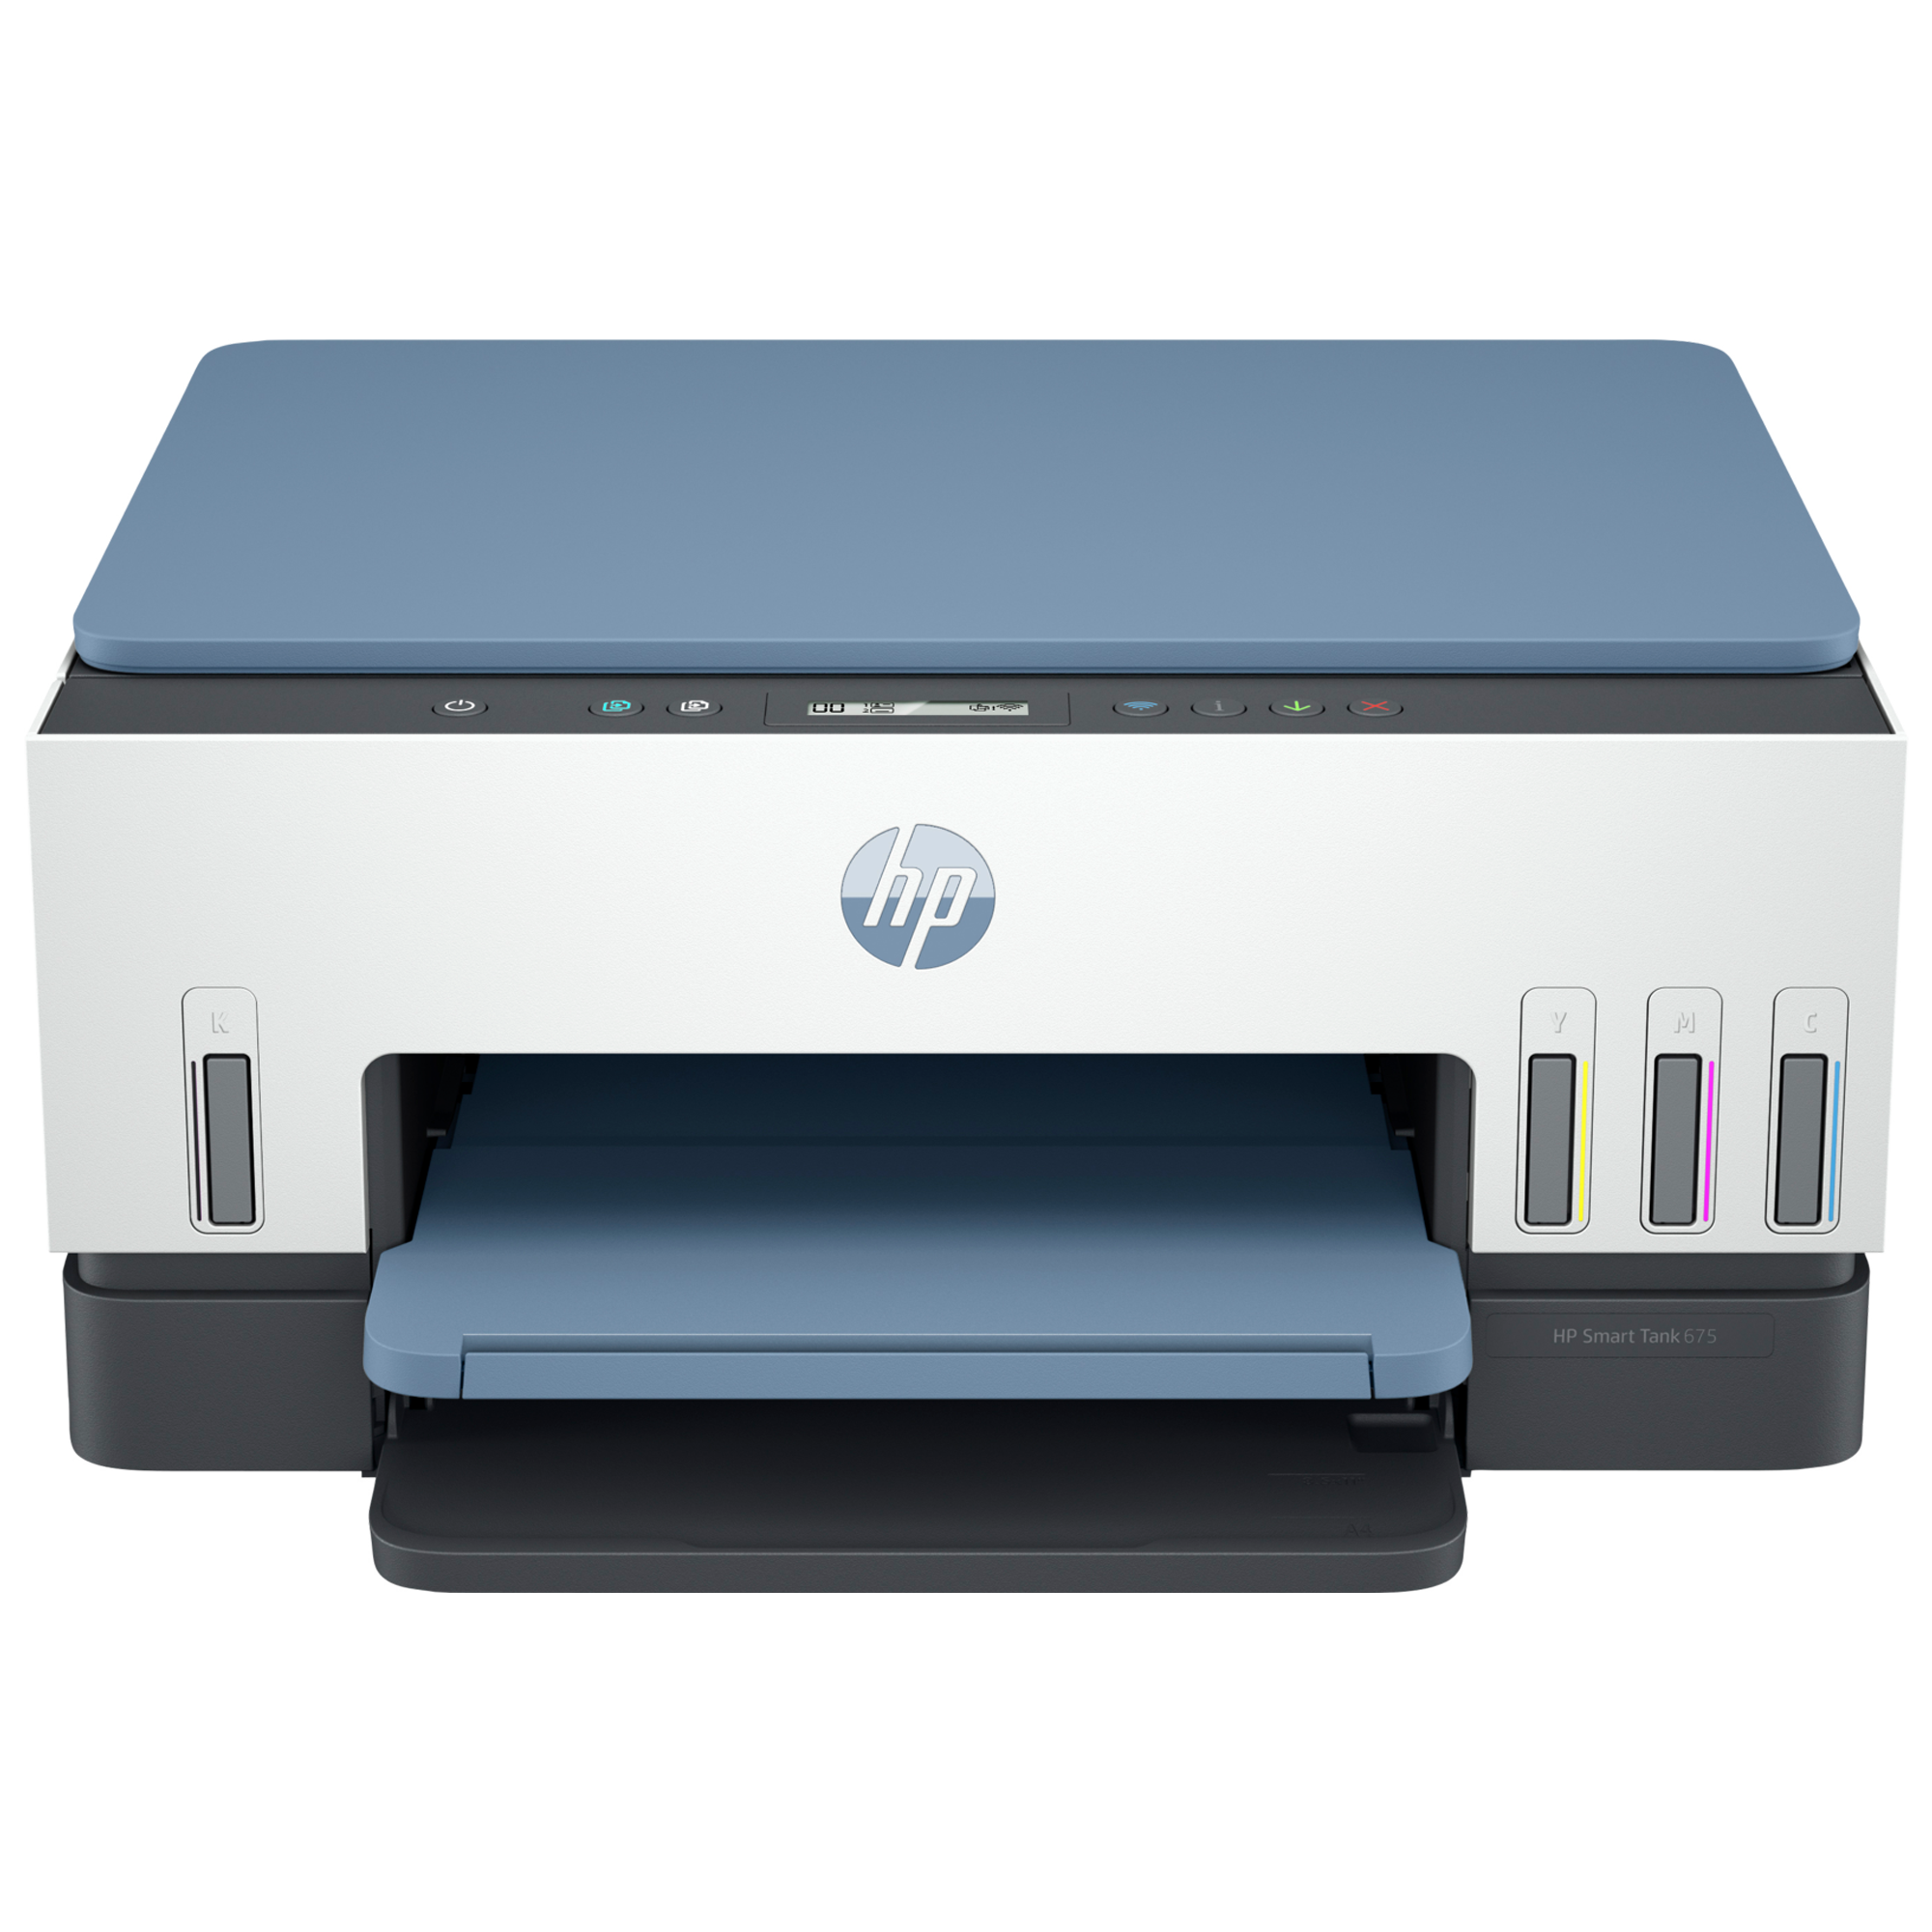 HP Smart Tank 675 All-in-One Printer Multi-function WiFi Color Printer  (White, Ink Tank)